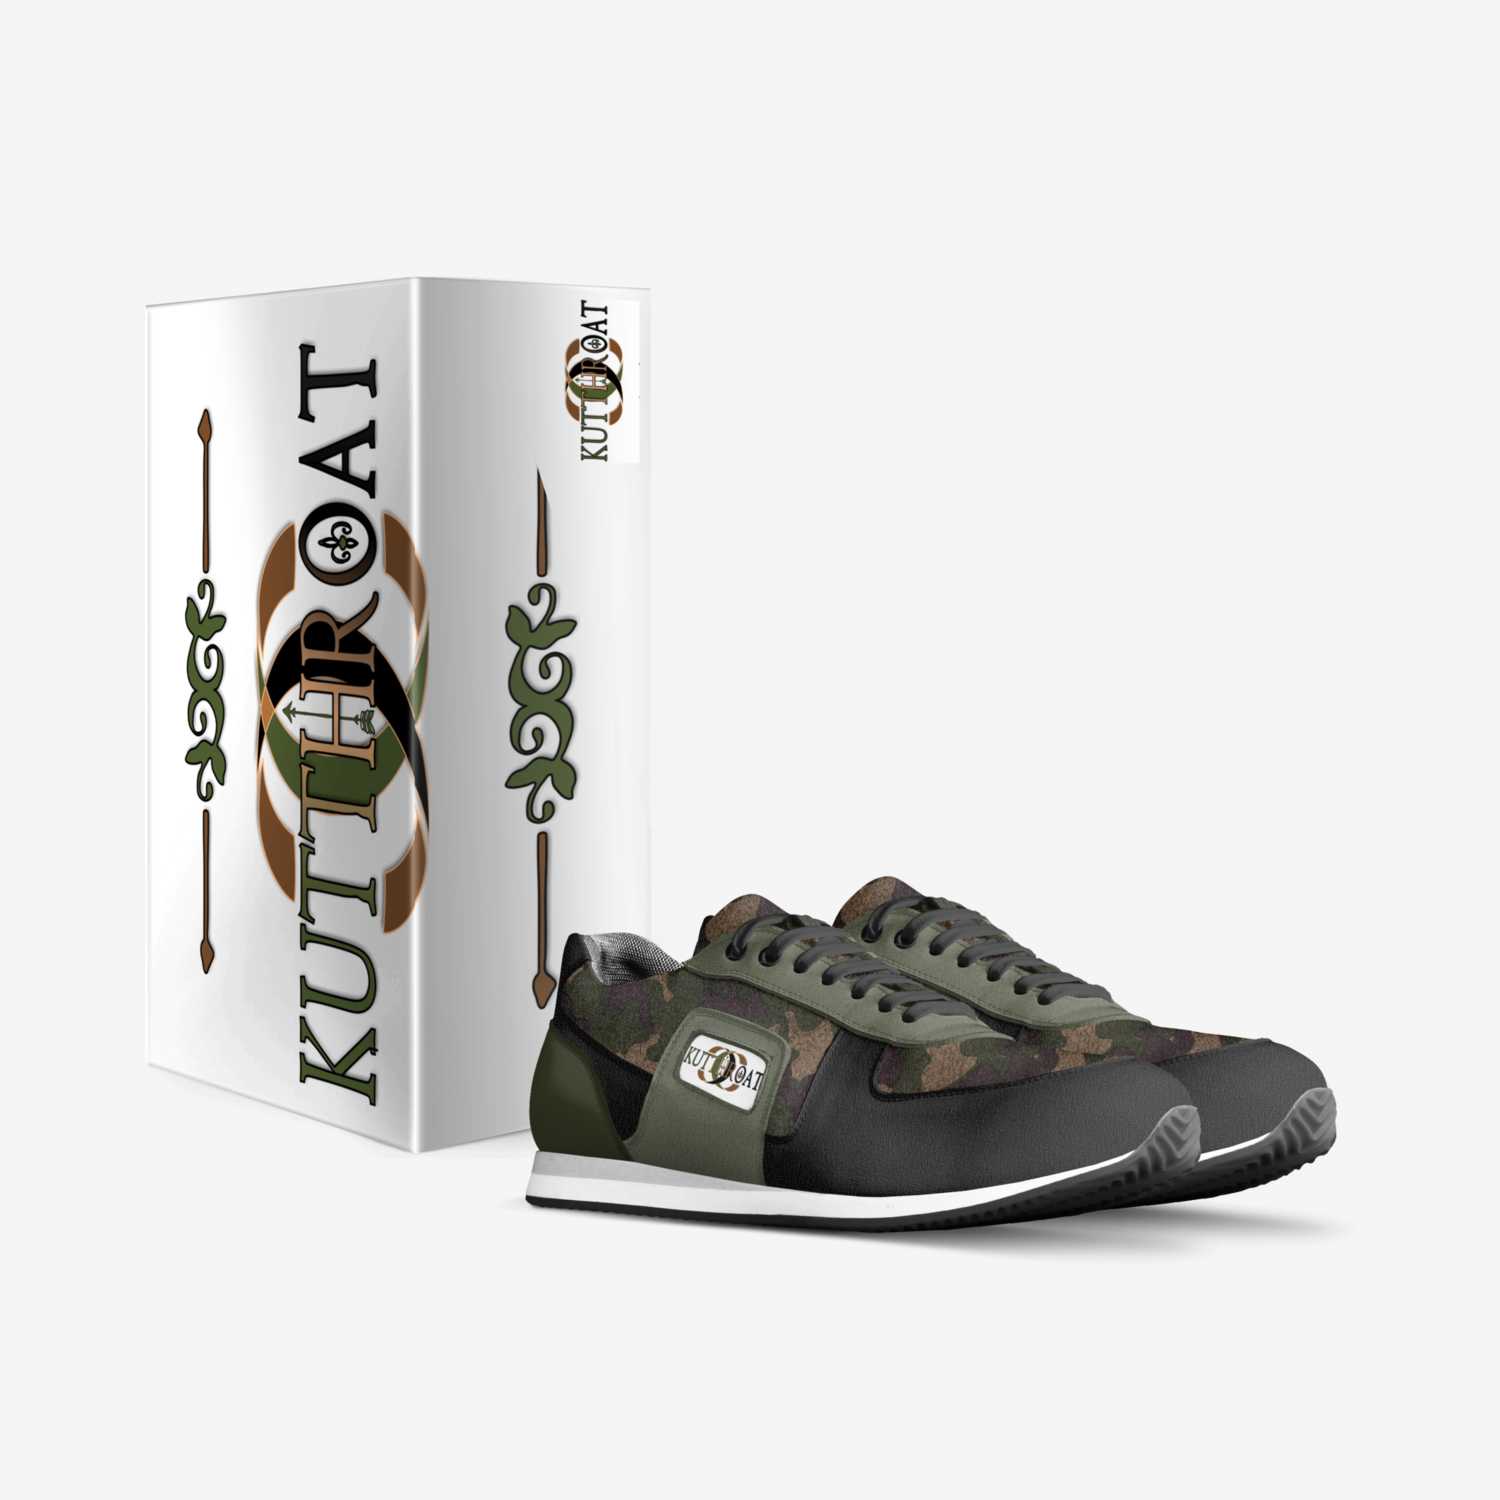 Kutthroat Donfuego custom made in Italy shoes by The Don | Box view